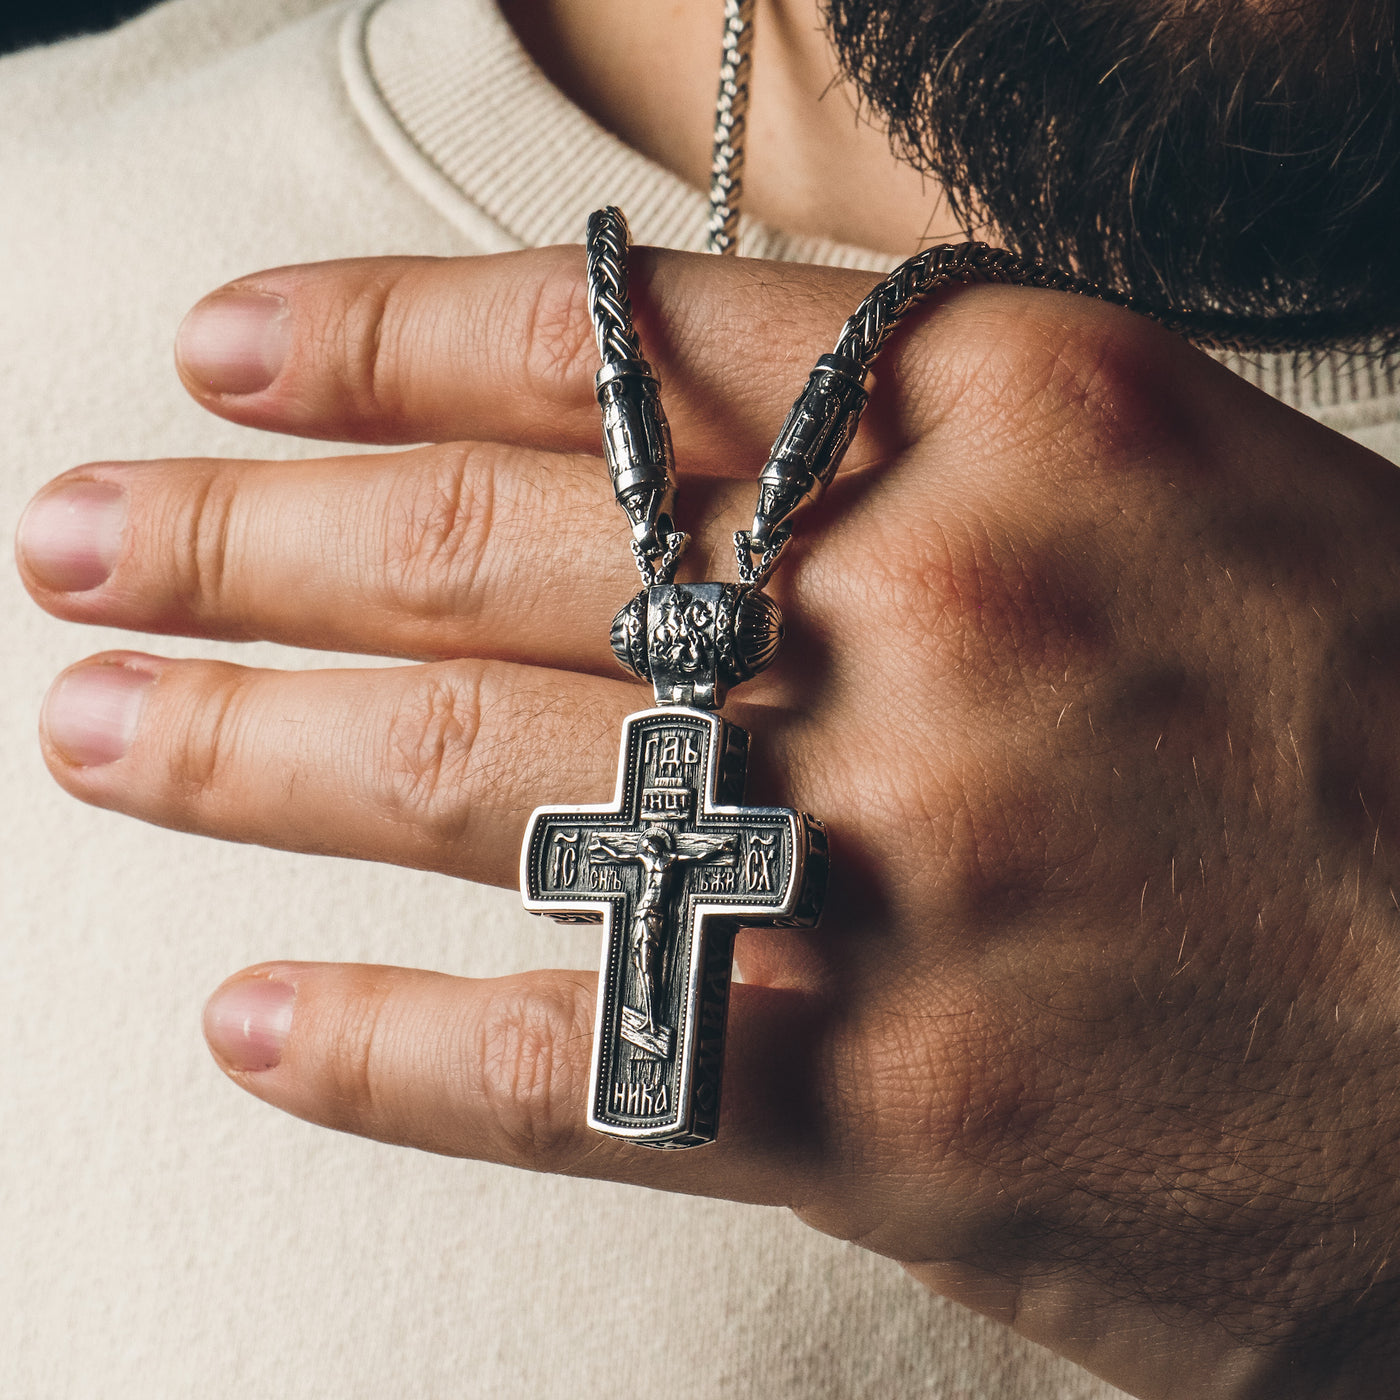 Silver Orthodox cross necklace